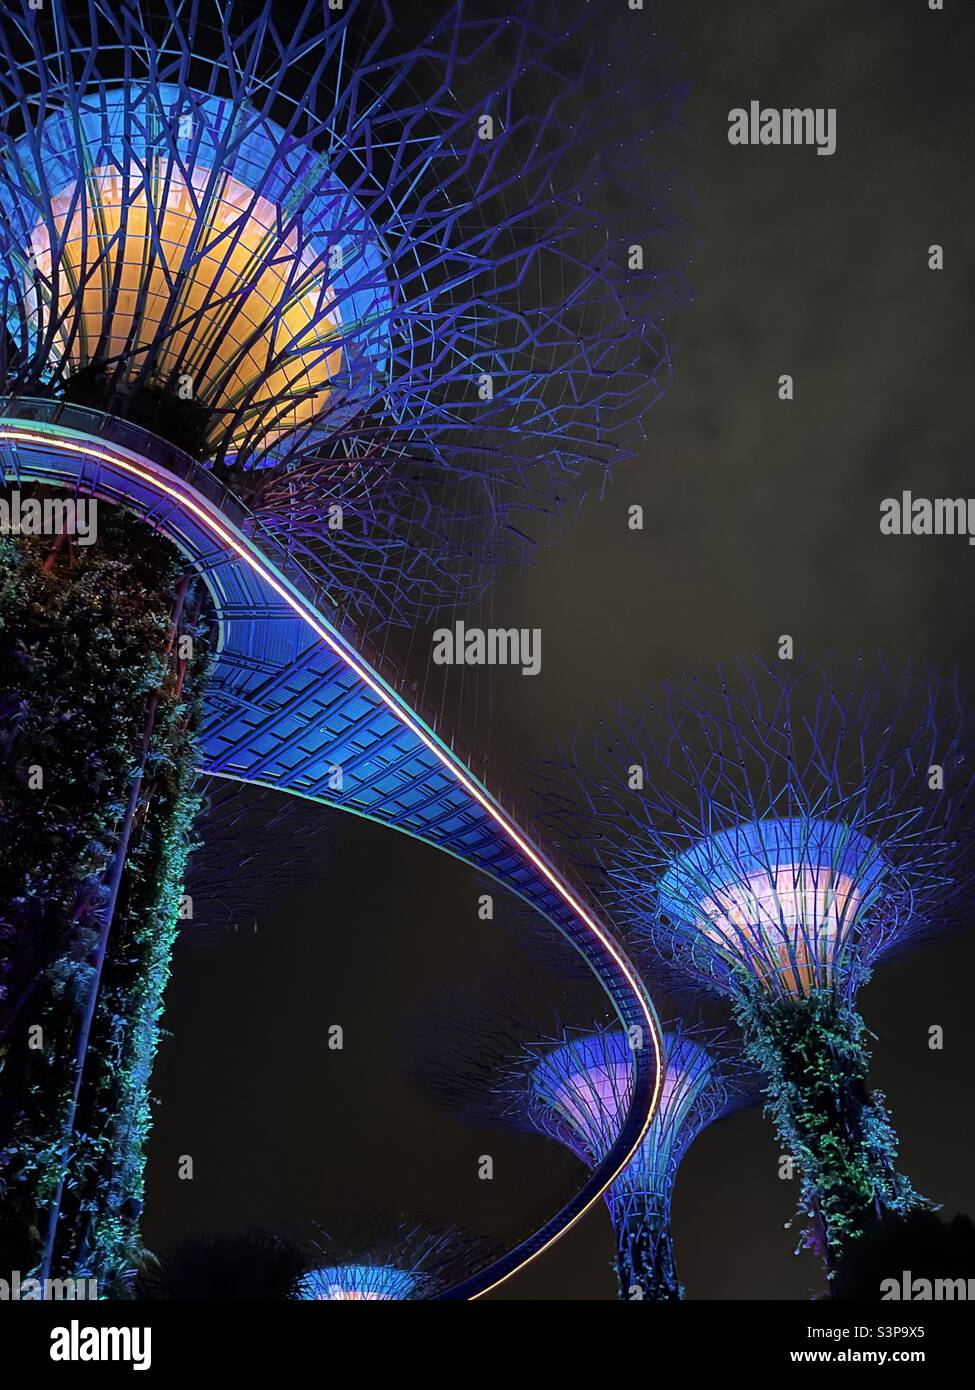 Super groove tree cluster at Singapore garden by the bay Stock Photo